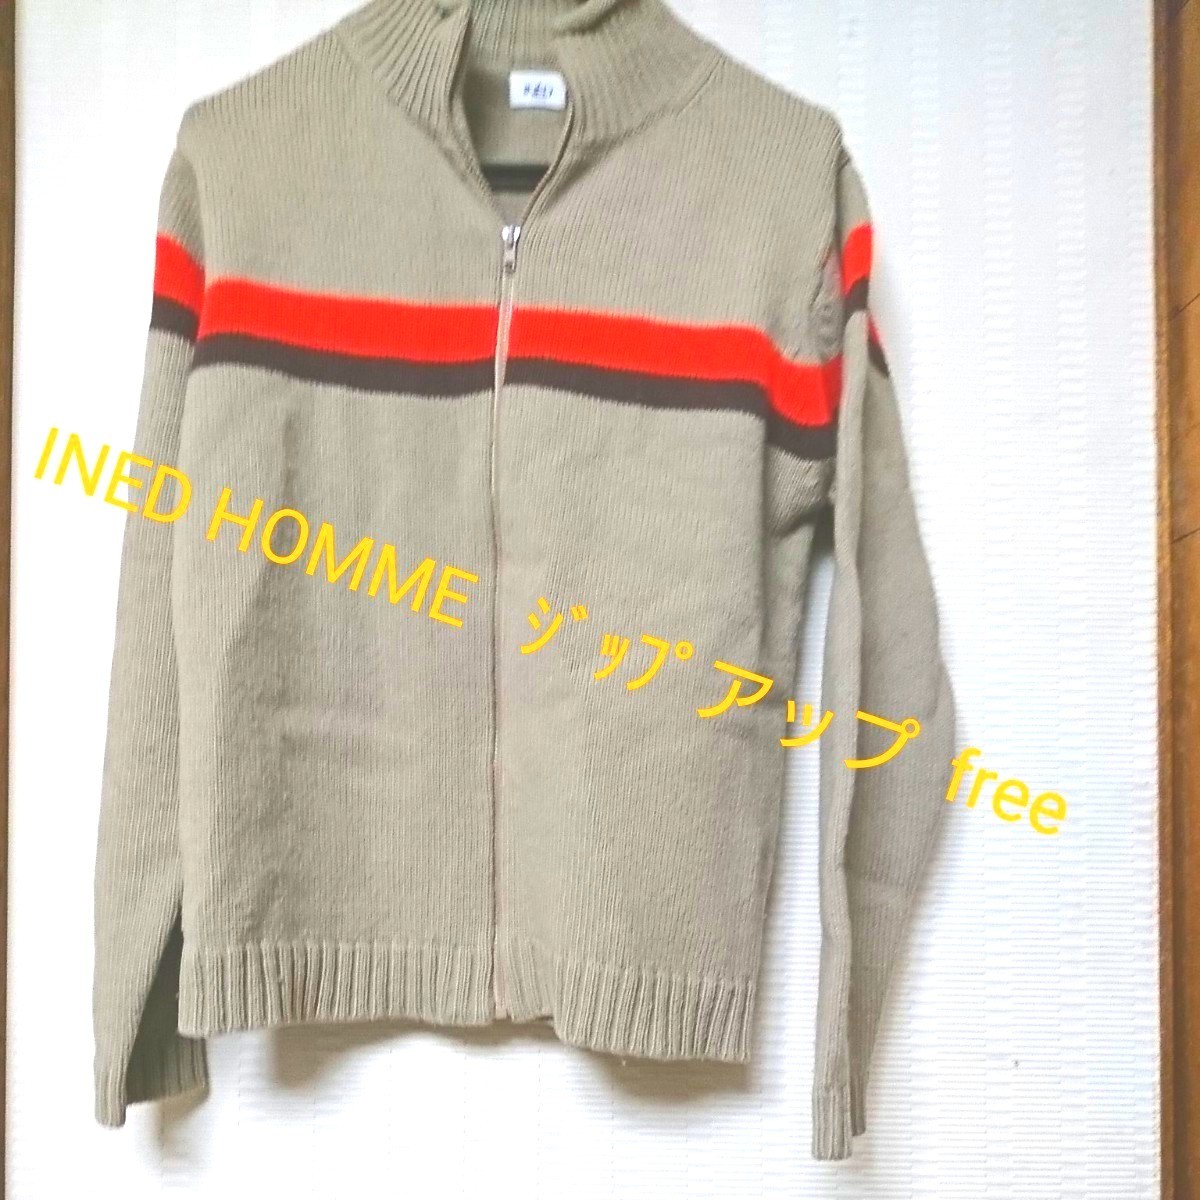 INED HOMME   ジップアップブルゾン  美品